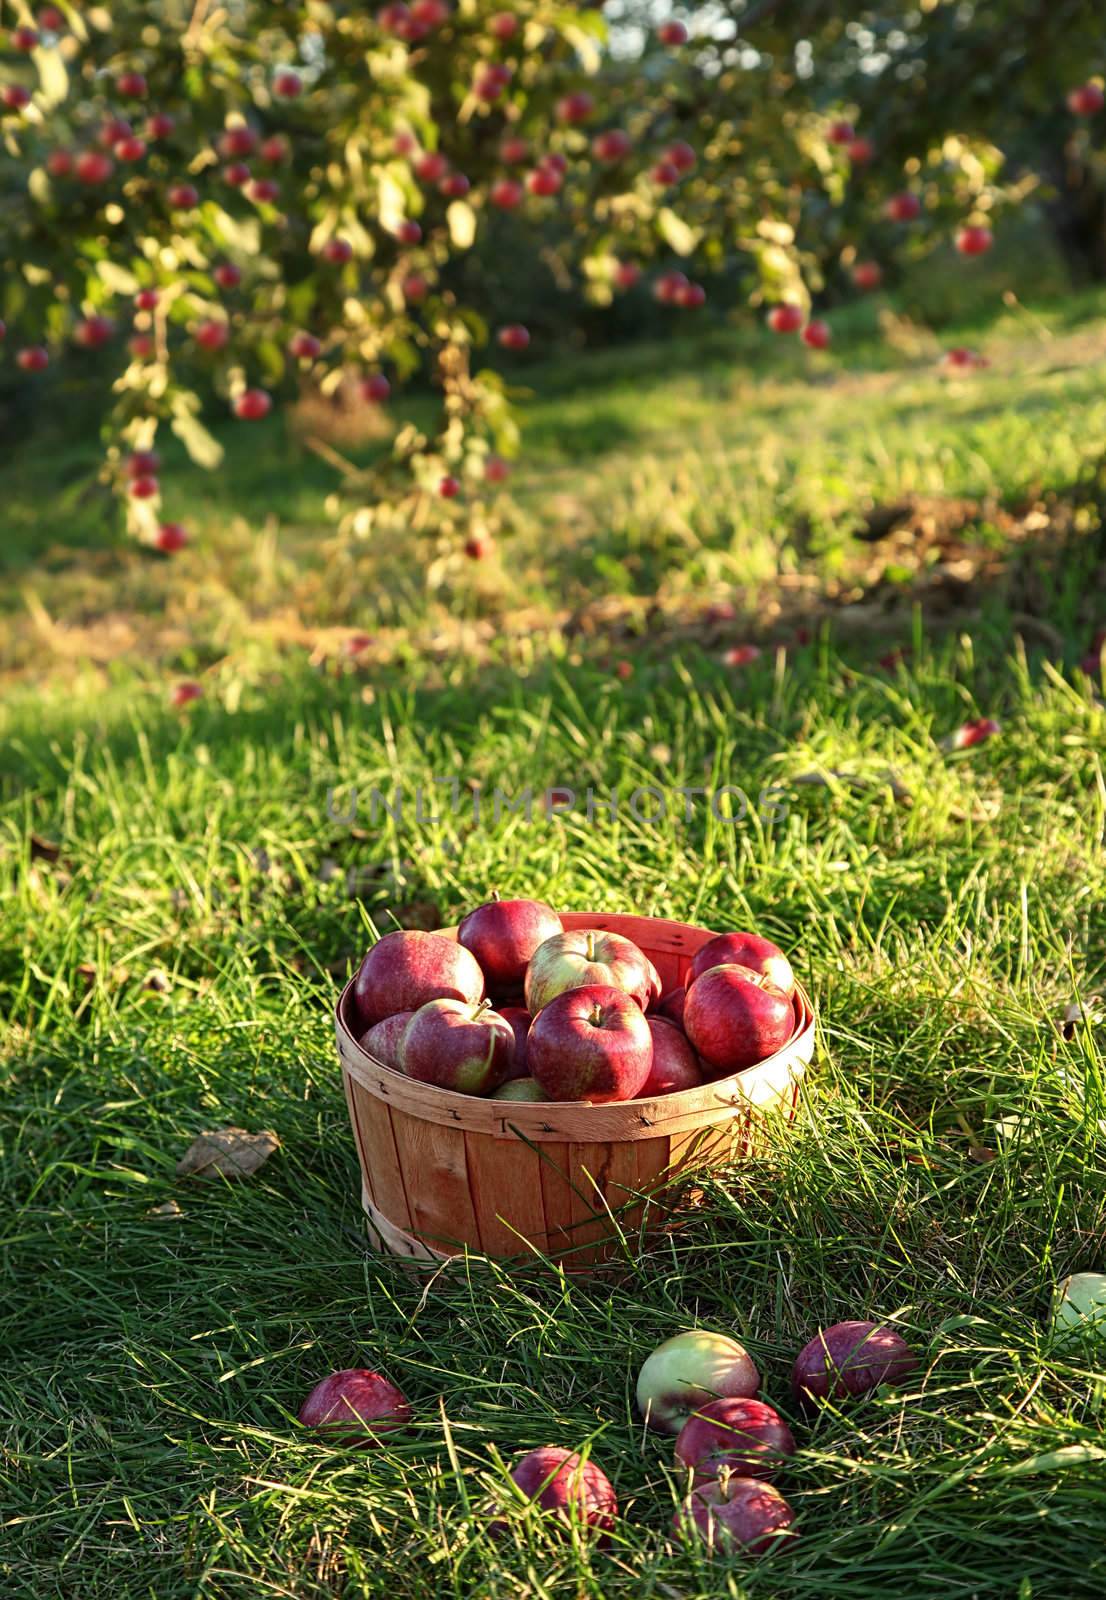 Freshly picked apples in the orchard in Autumn